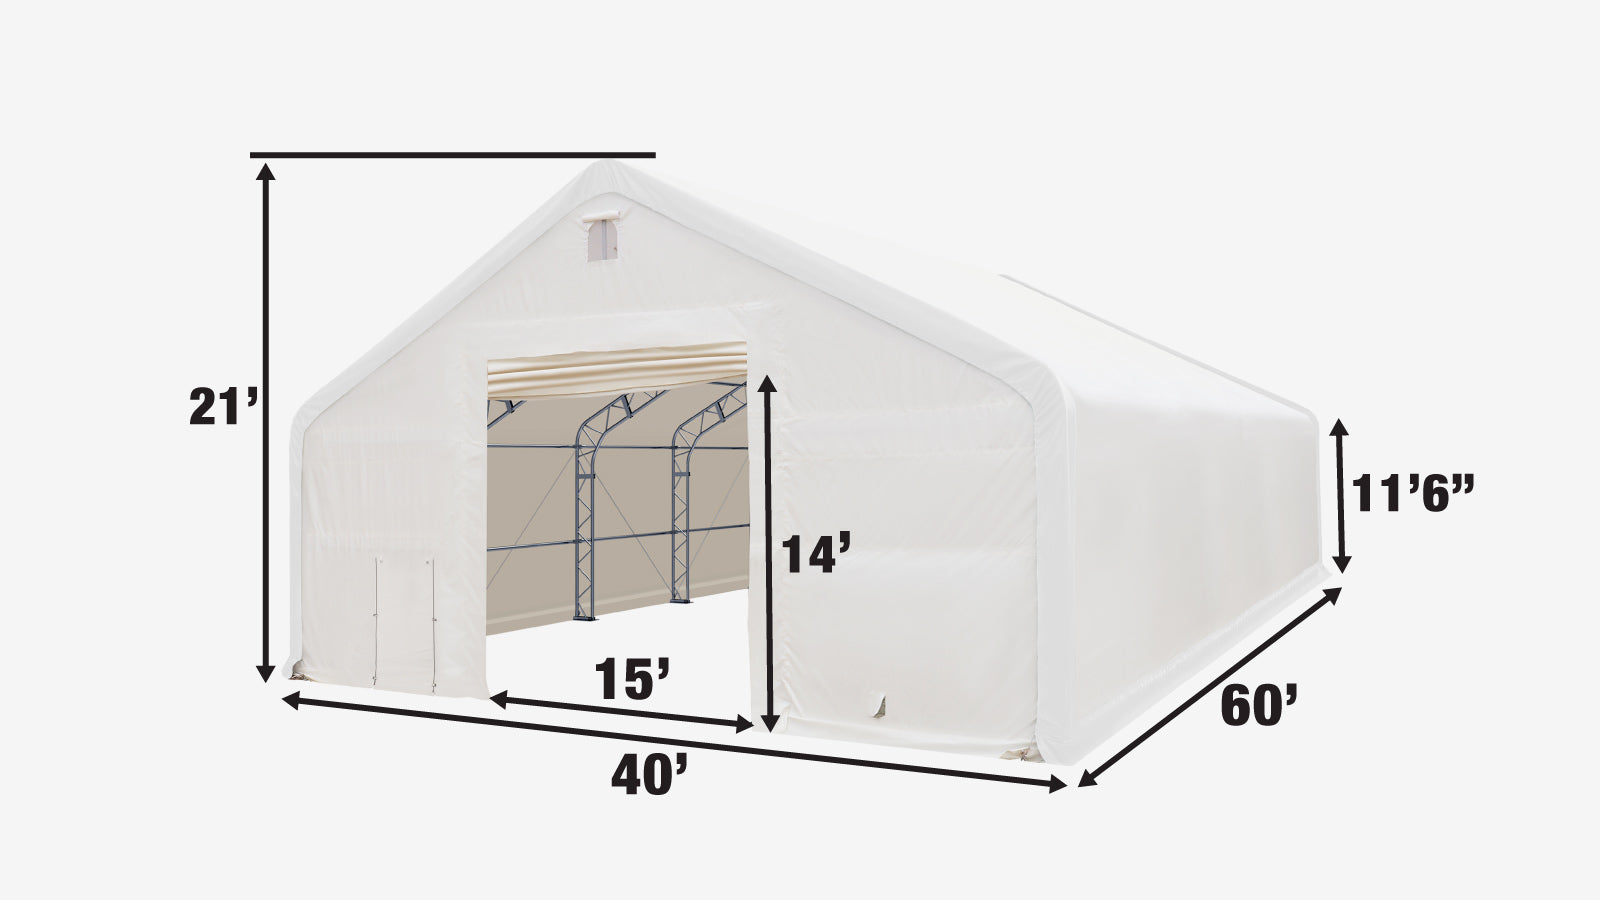 TMG Industrial 40' x 60' Dual Truss Storage Shelter with Heavy Duty 21 oz PVC Cover & Drive Through Doors, TMG-DT4061 (Previously DT4060)-specifications-image